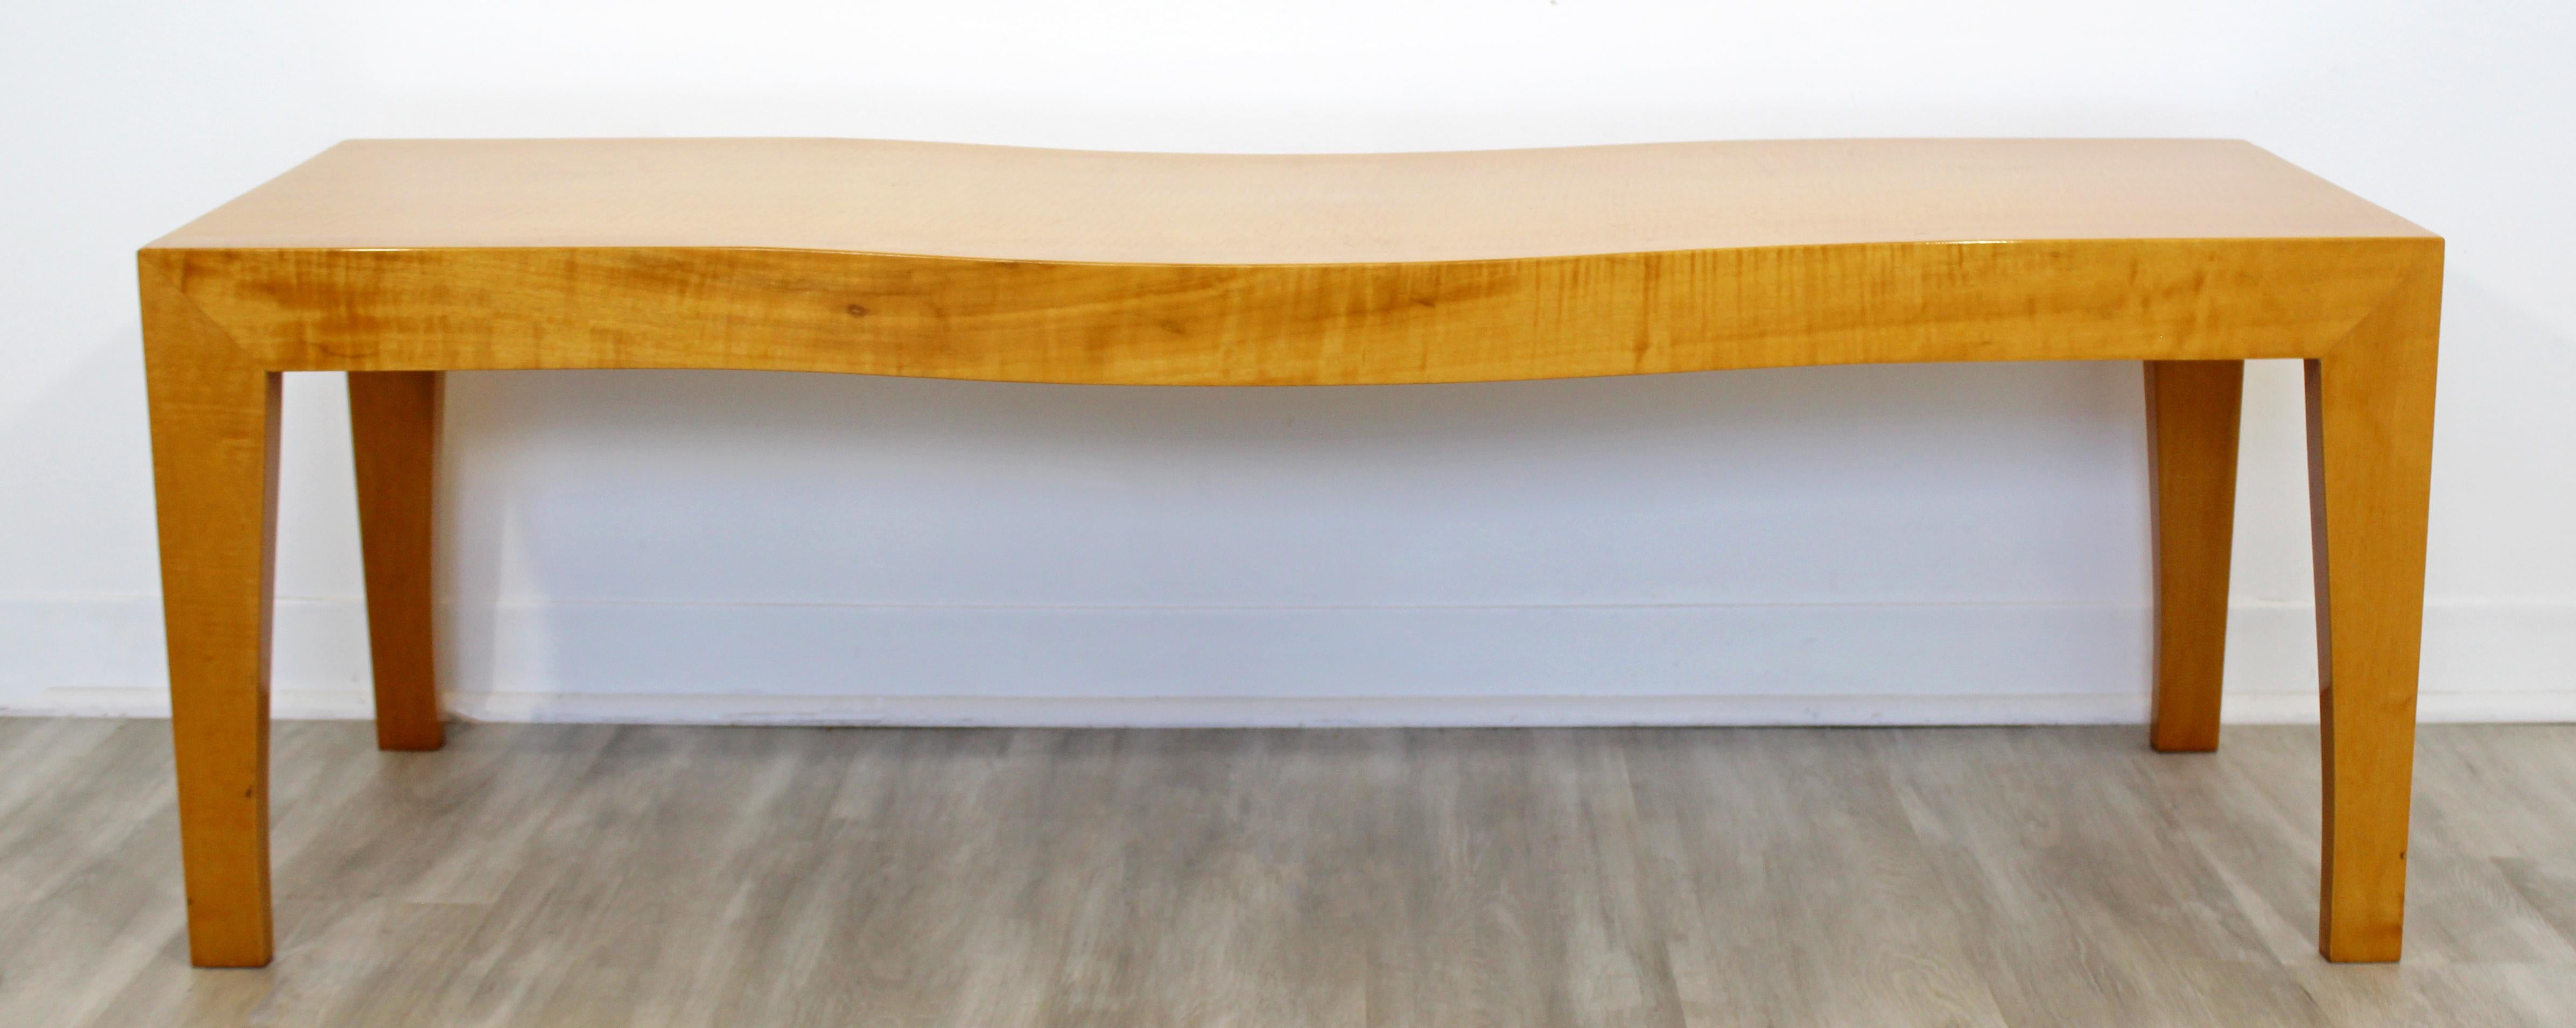 For your consideration is a sensational, three-seat wave bench, made of lacquered maple, circa 1990s. In excellent condition. The dimensions are 54